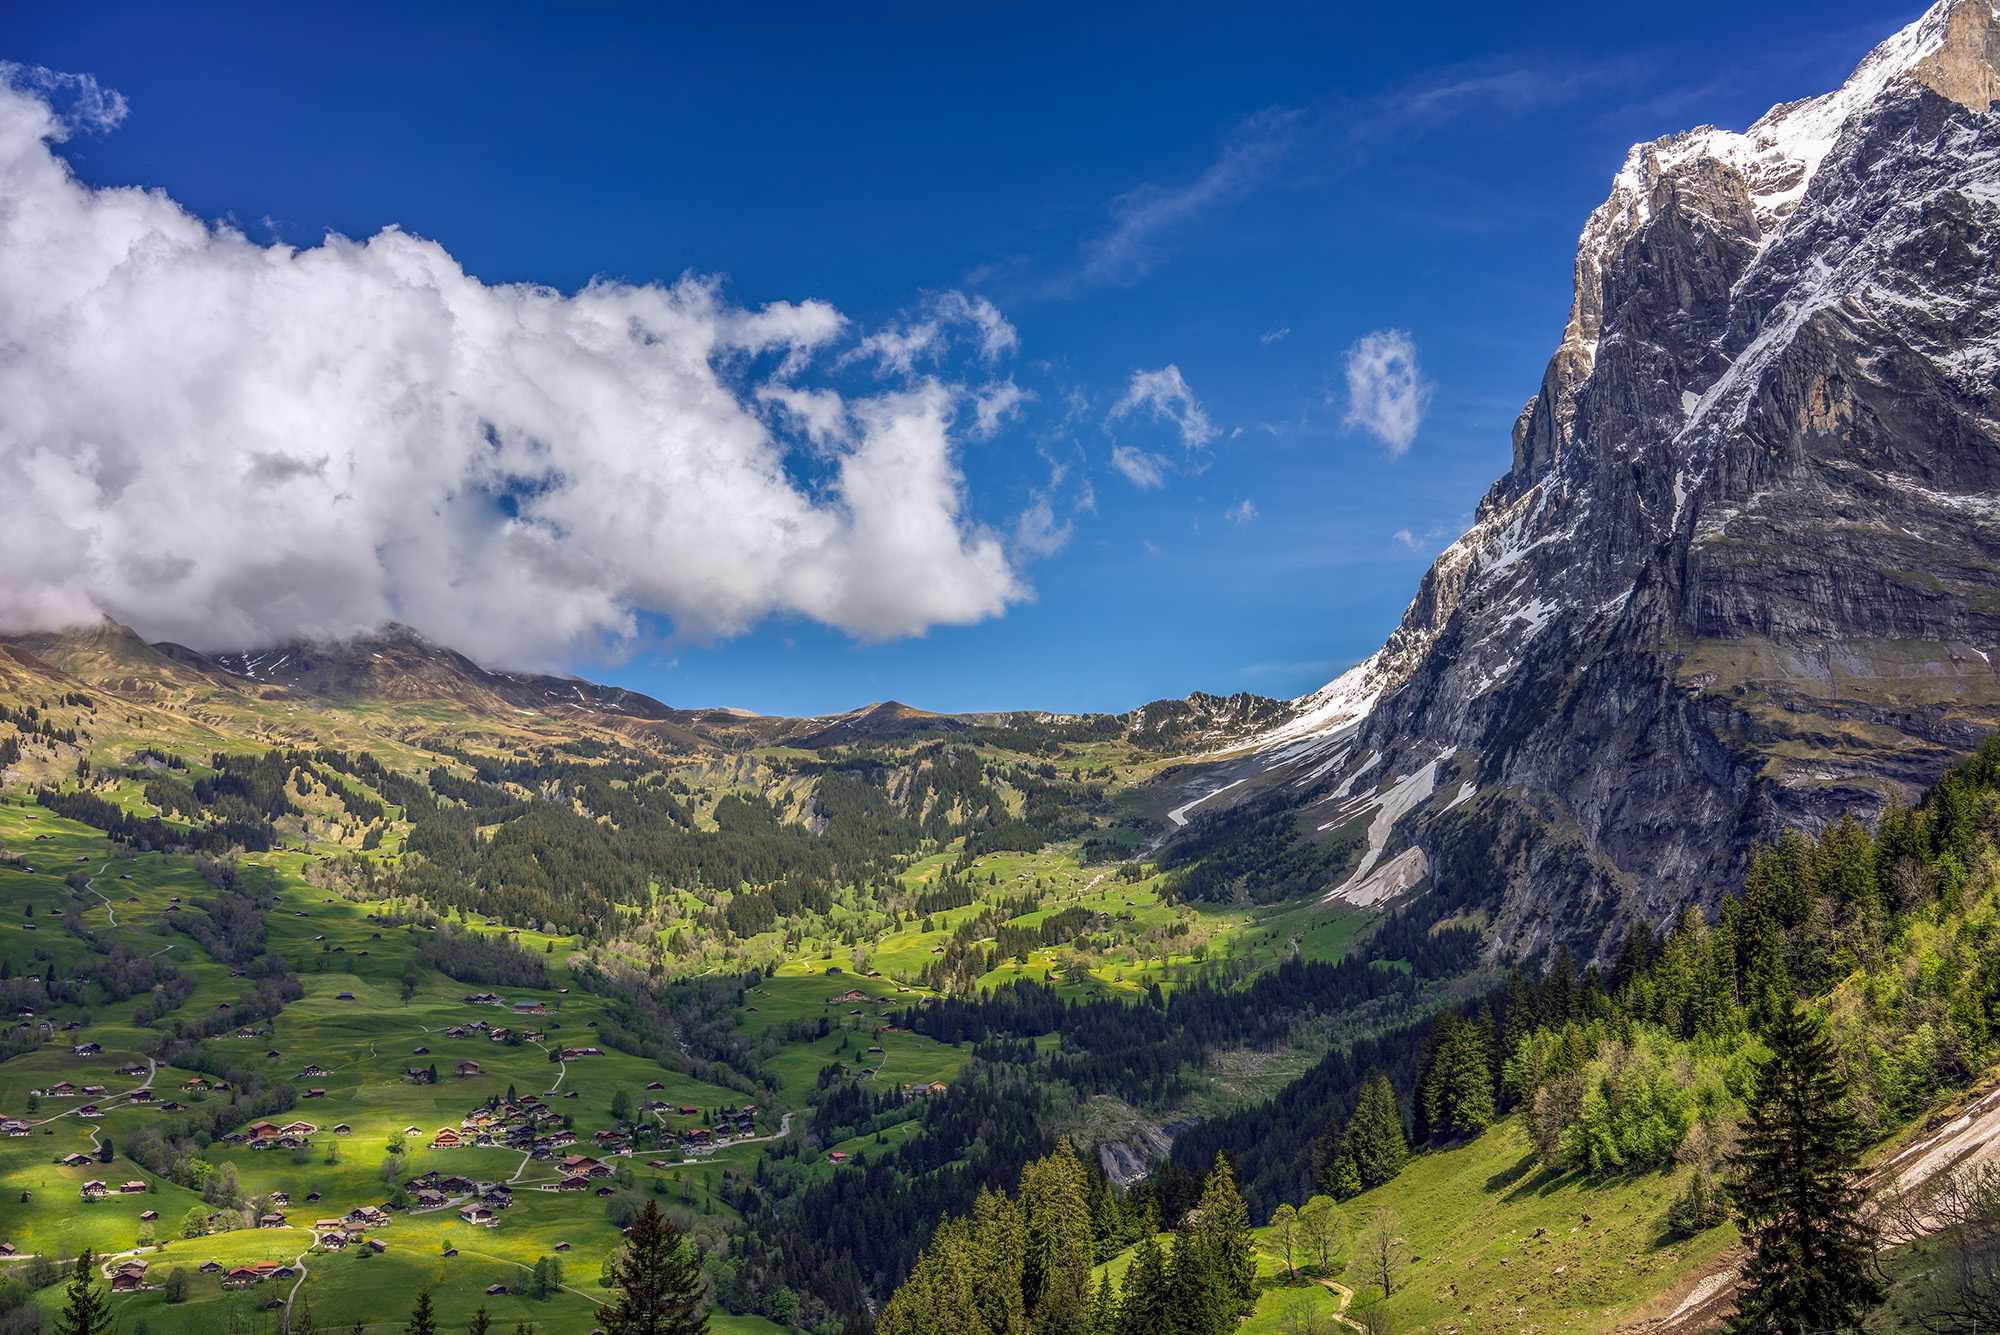 "Grindelwald's Alpine Splendor" captures the essence of a picturesque Swiss valley. In this scene, the valley unfolds beneath...